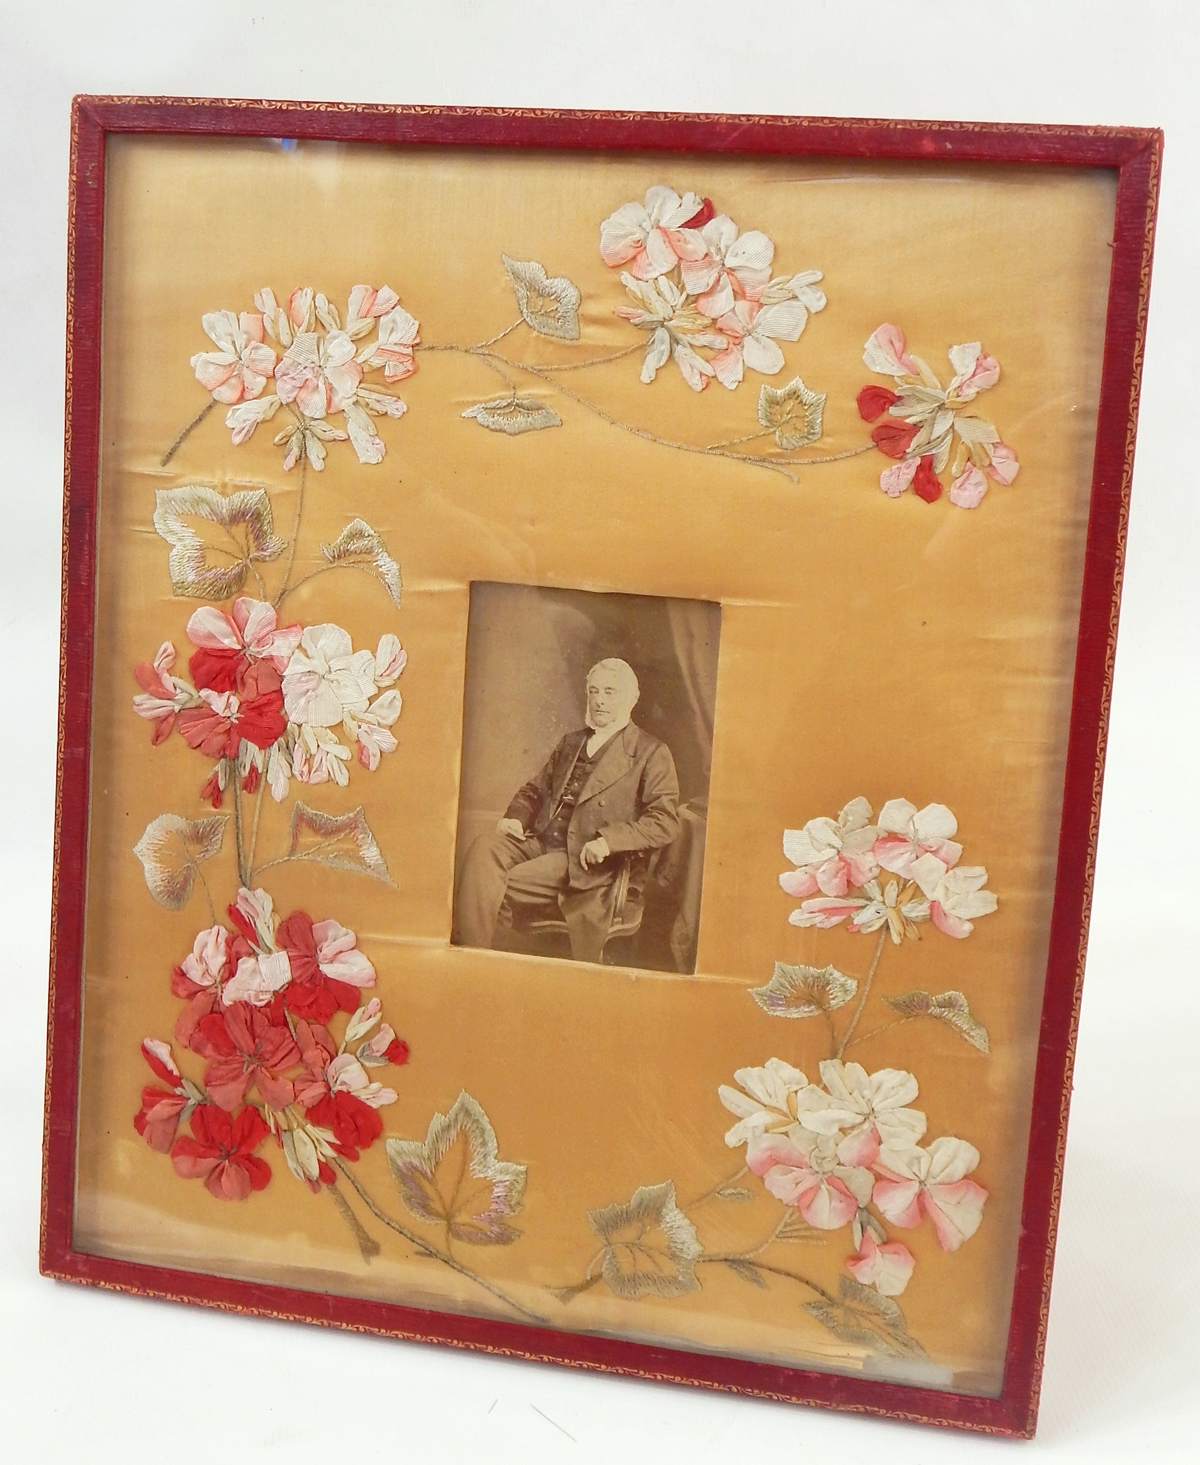 Large red leather gilt tooled photographe frame, with an embroidered and silk applique flowers,